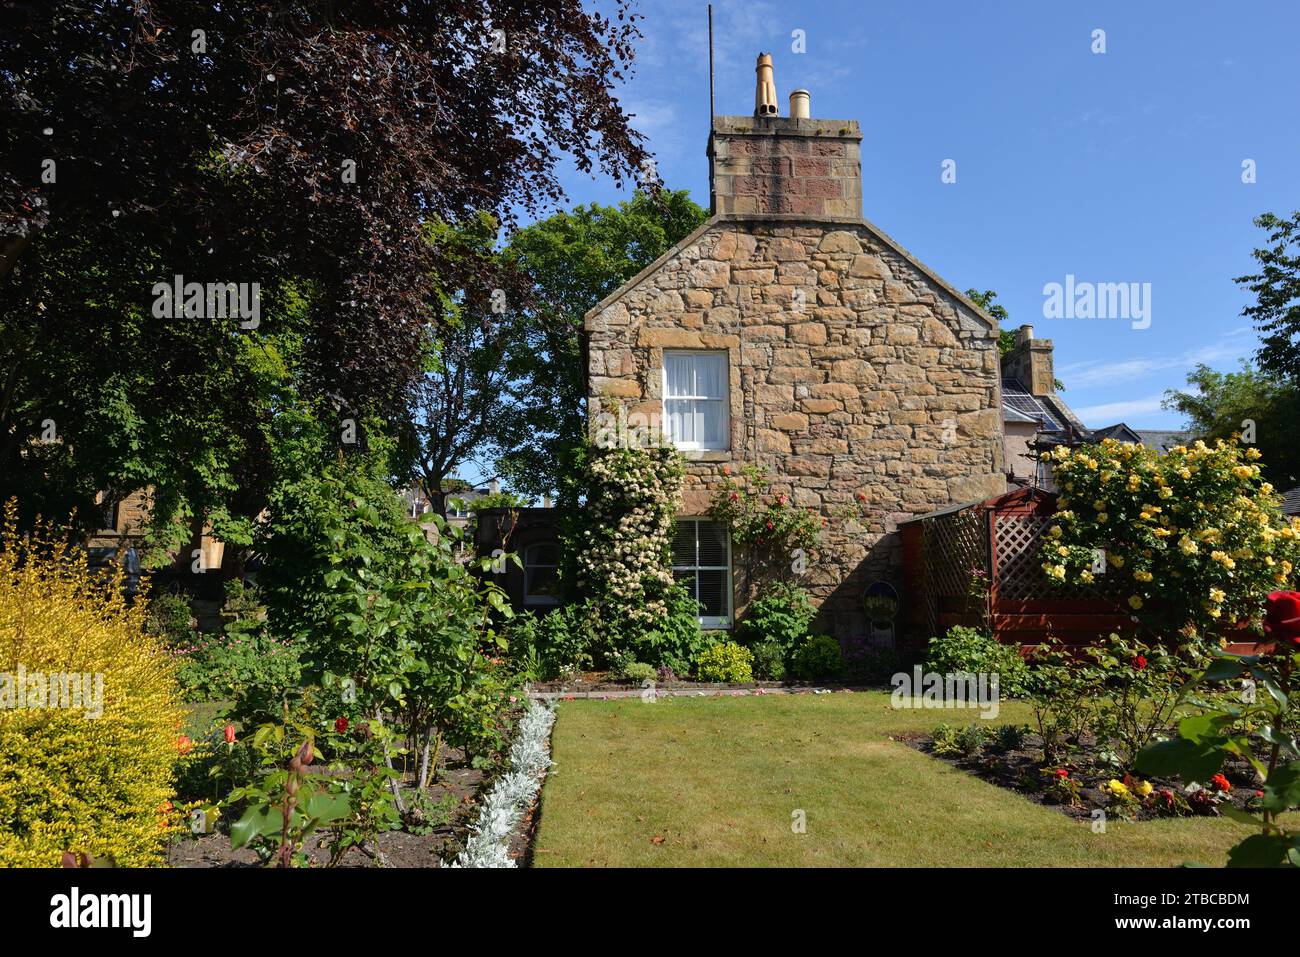 Gable end of a traditional stone house with garden in Sutherland, Scotland Stock Photo